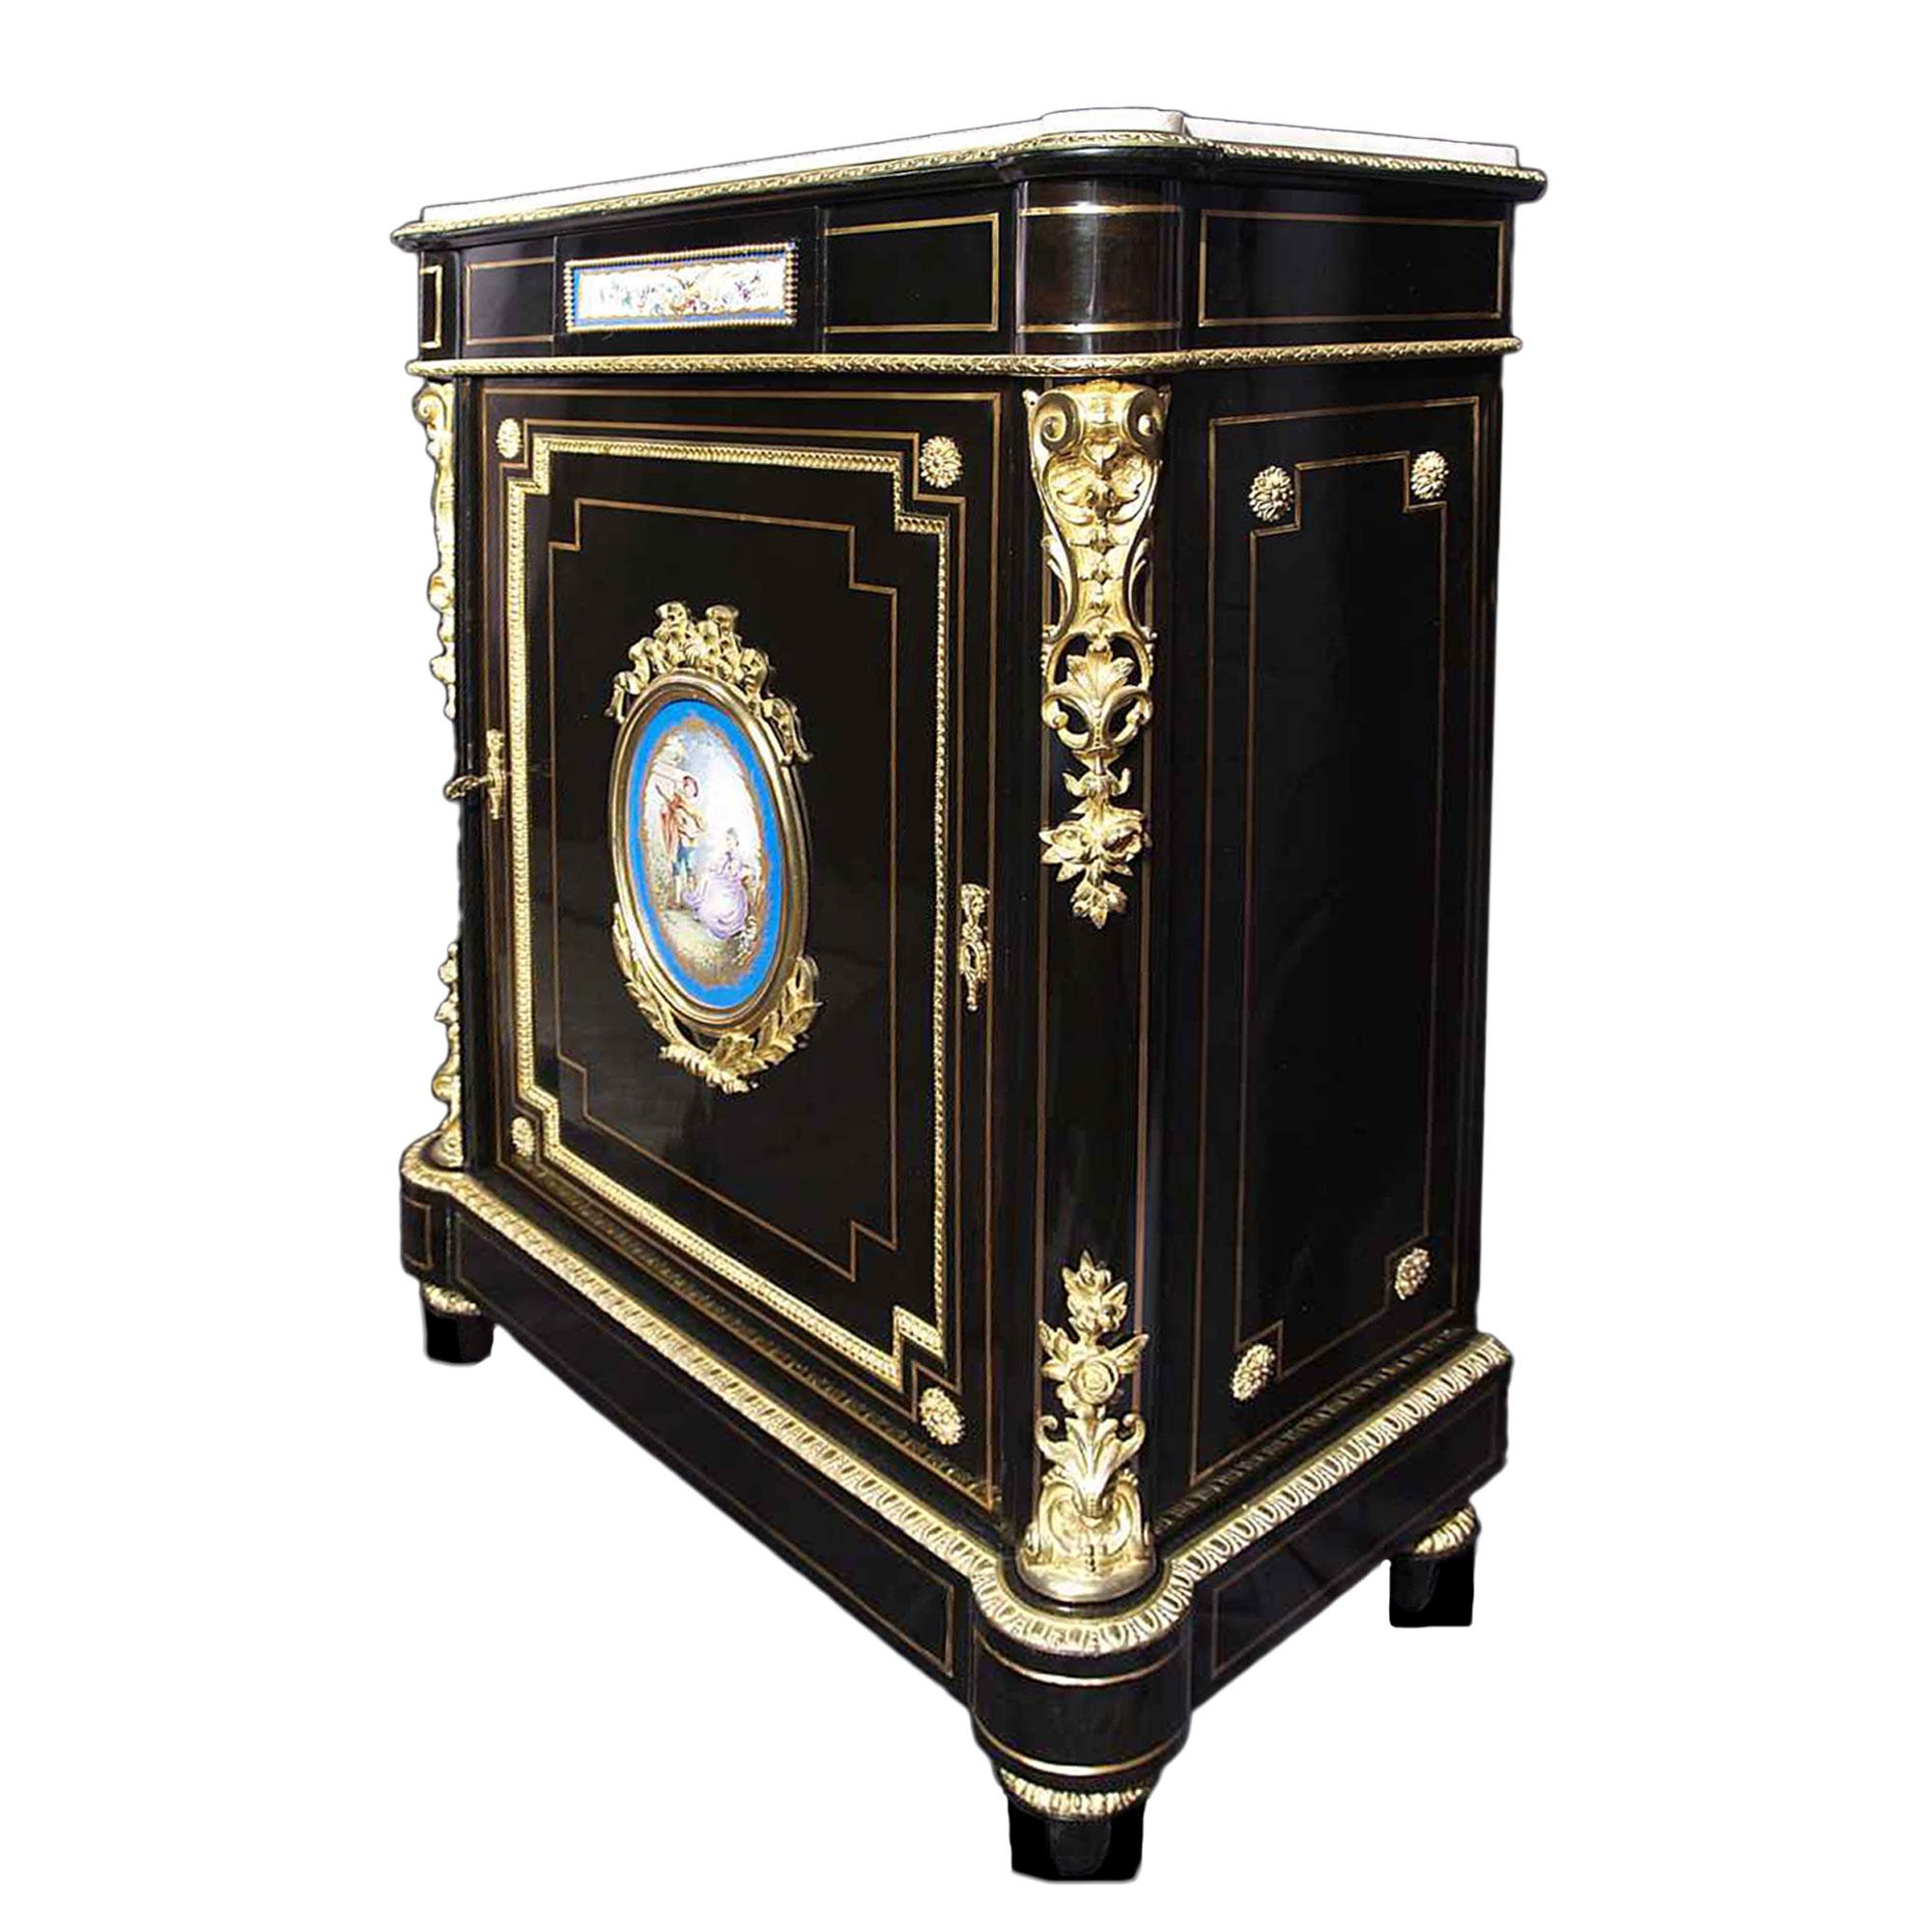 An attractive and very elegant French 19th Century Napoleon III period ebony cabinet with Sèvres porcelain plaques and ormolu mounts. The one door cabinet is raised by topie supports below the straight apron and rounded corneres with brass filets.